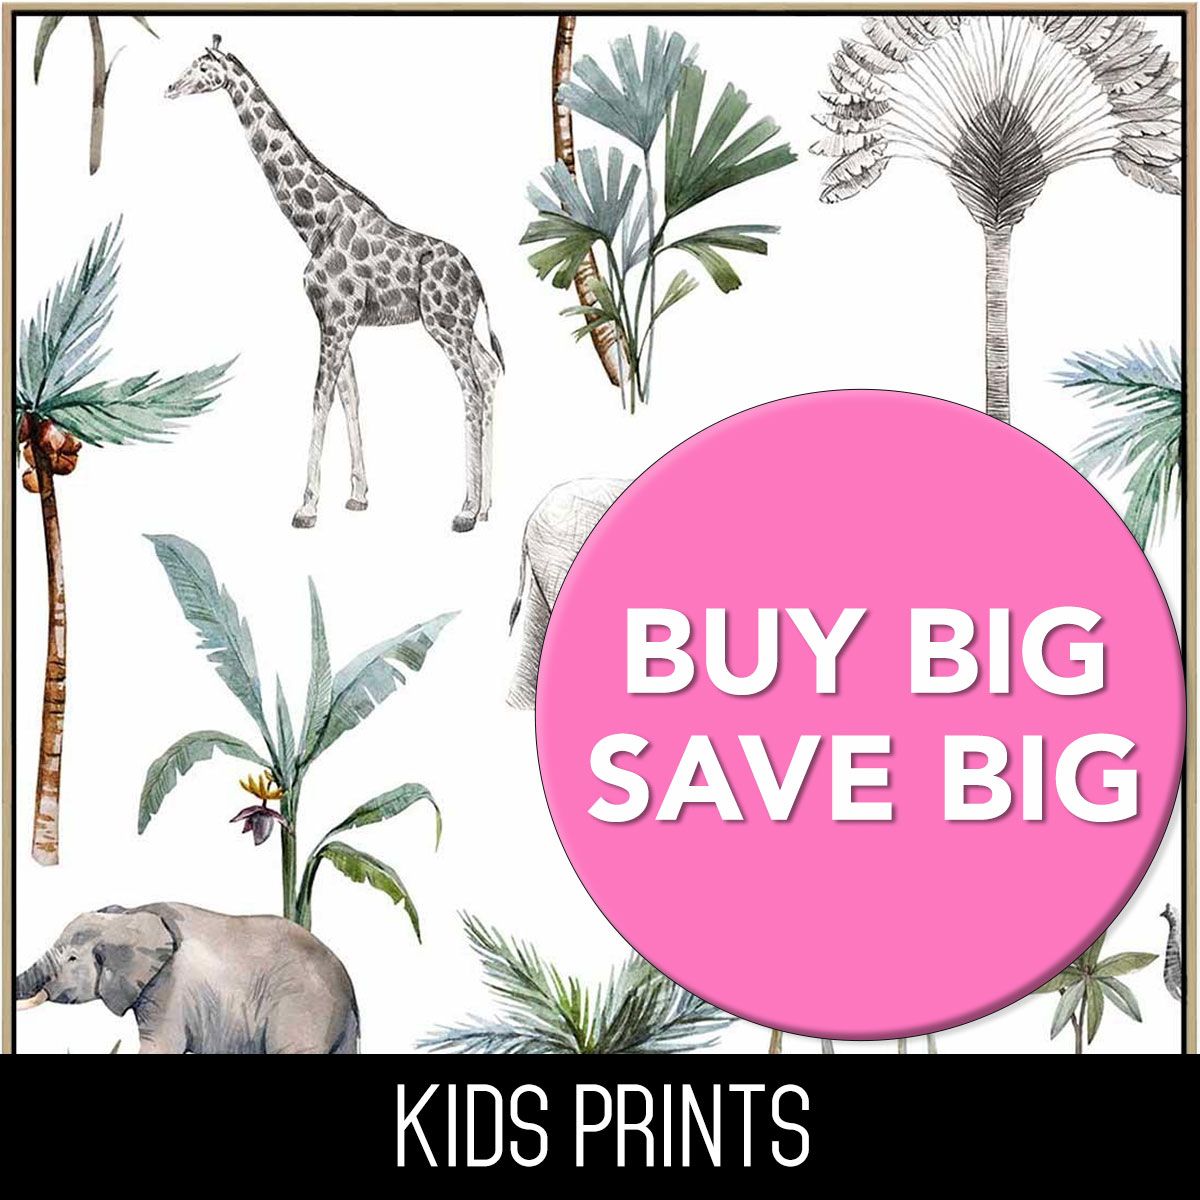 View All Childrens Prints